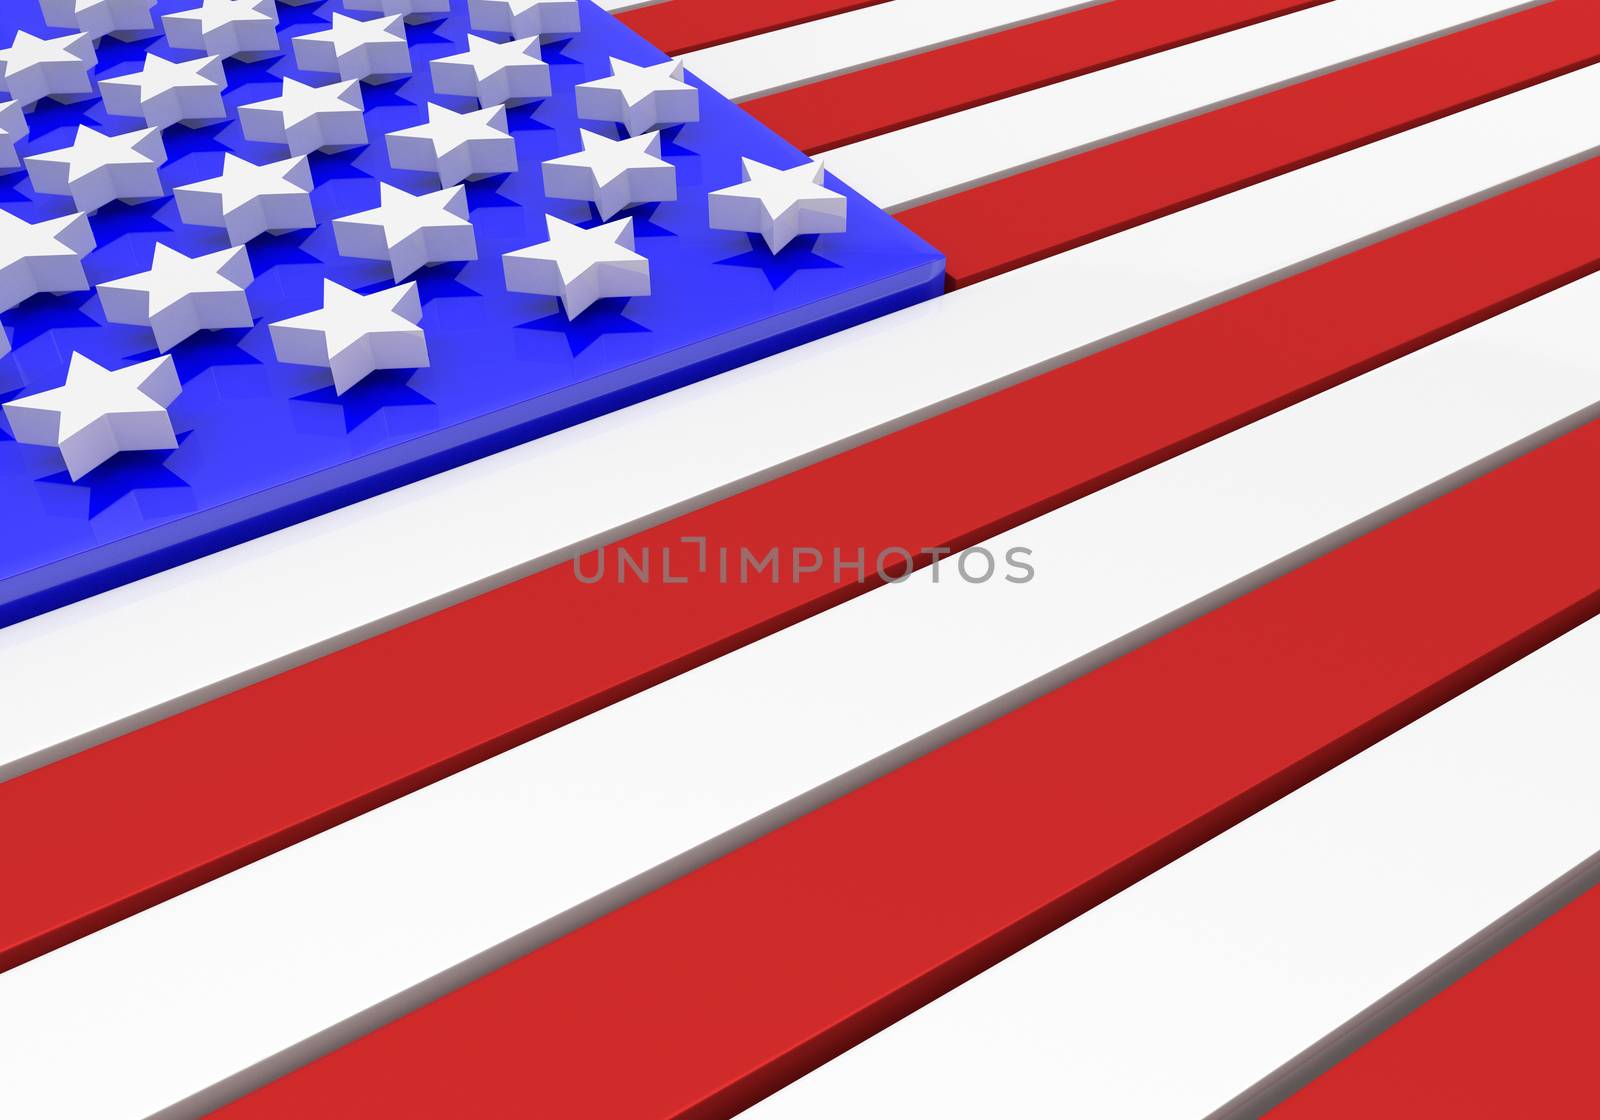 3D model of an American flag in relief with stars floating